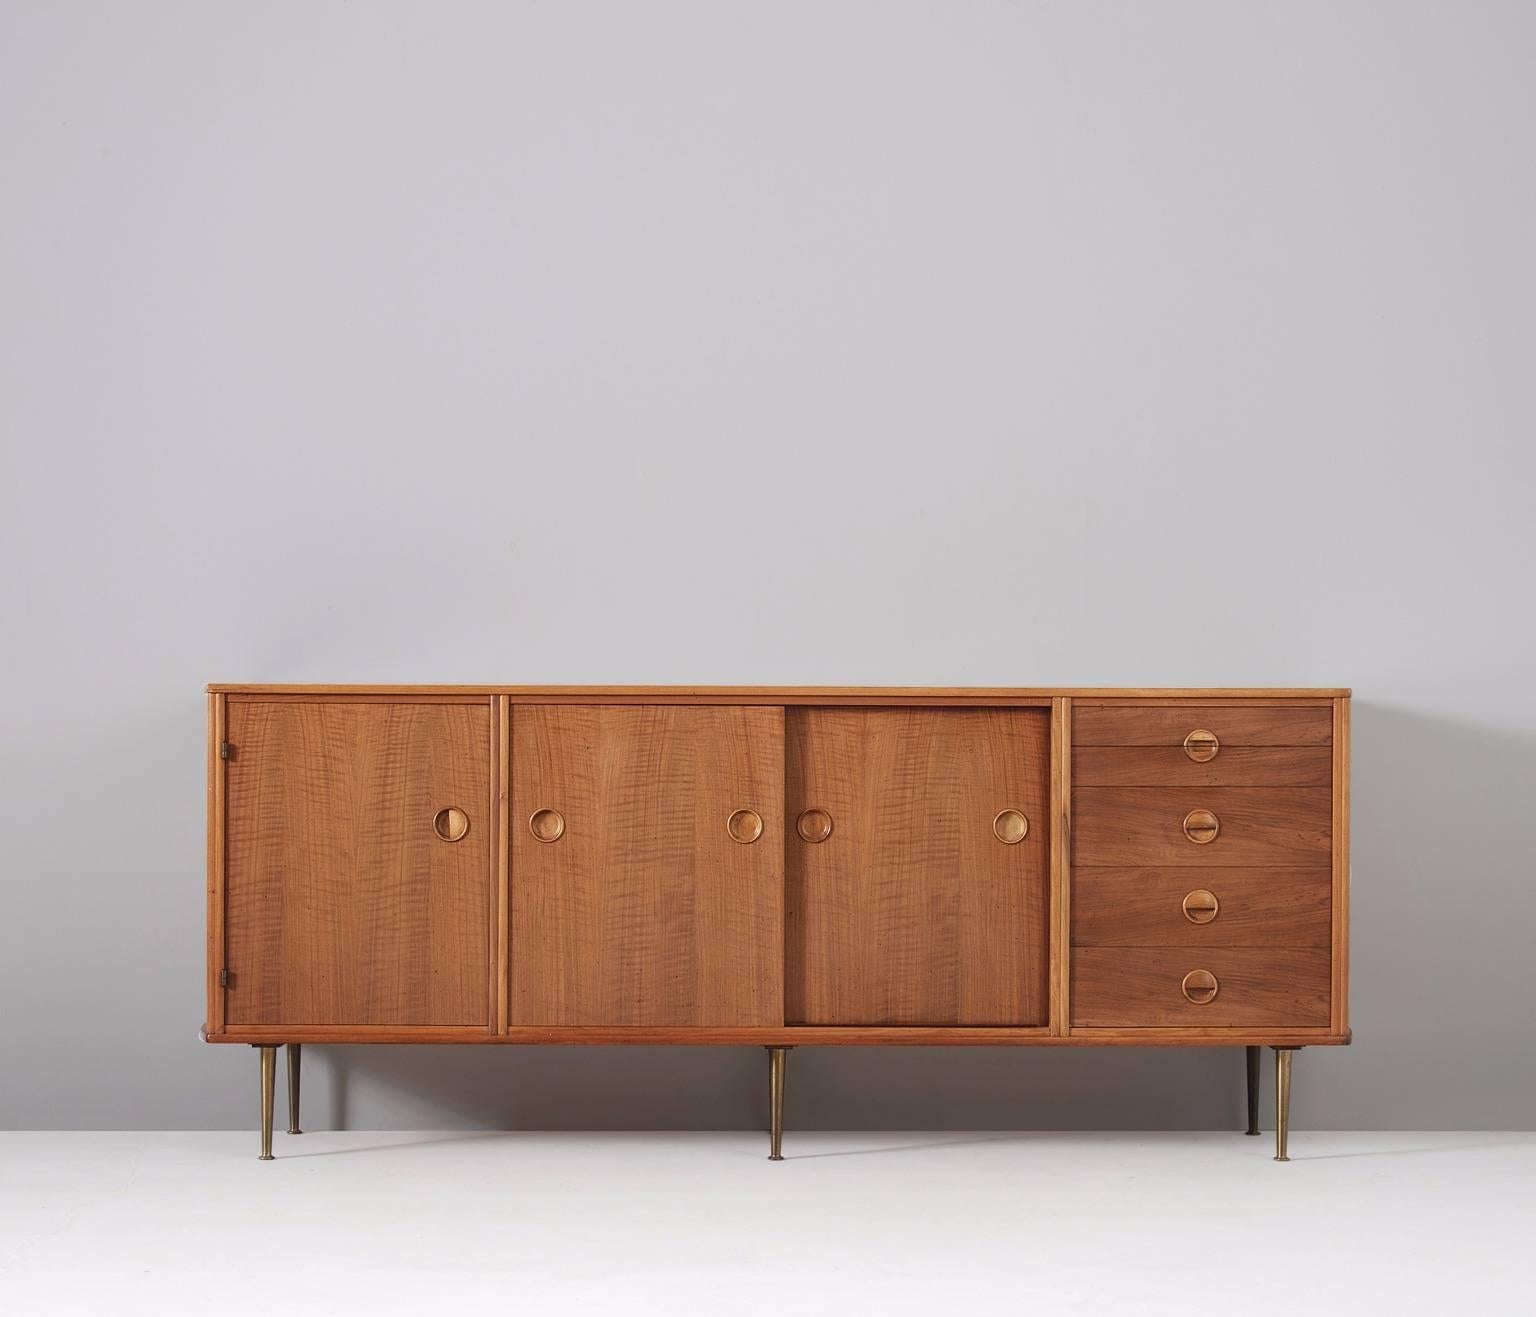 Sideboard in walnut and brass, by William Watting for Fristho, Netherlands 1958. 

Credenza in walnut with six brass legs. Five drawers on the right, two sliding doors in the middle and one door with shelves on the left. The watered walnut shows a